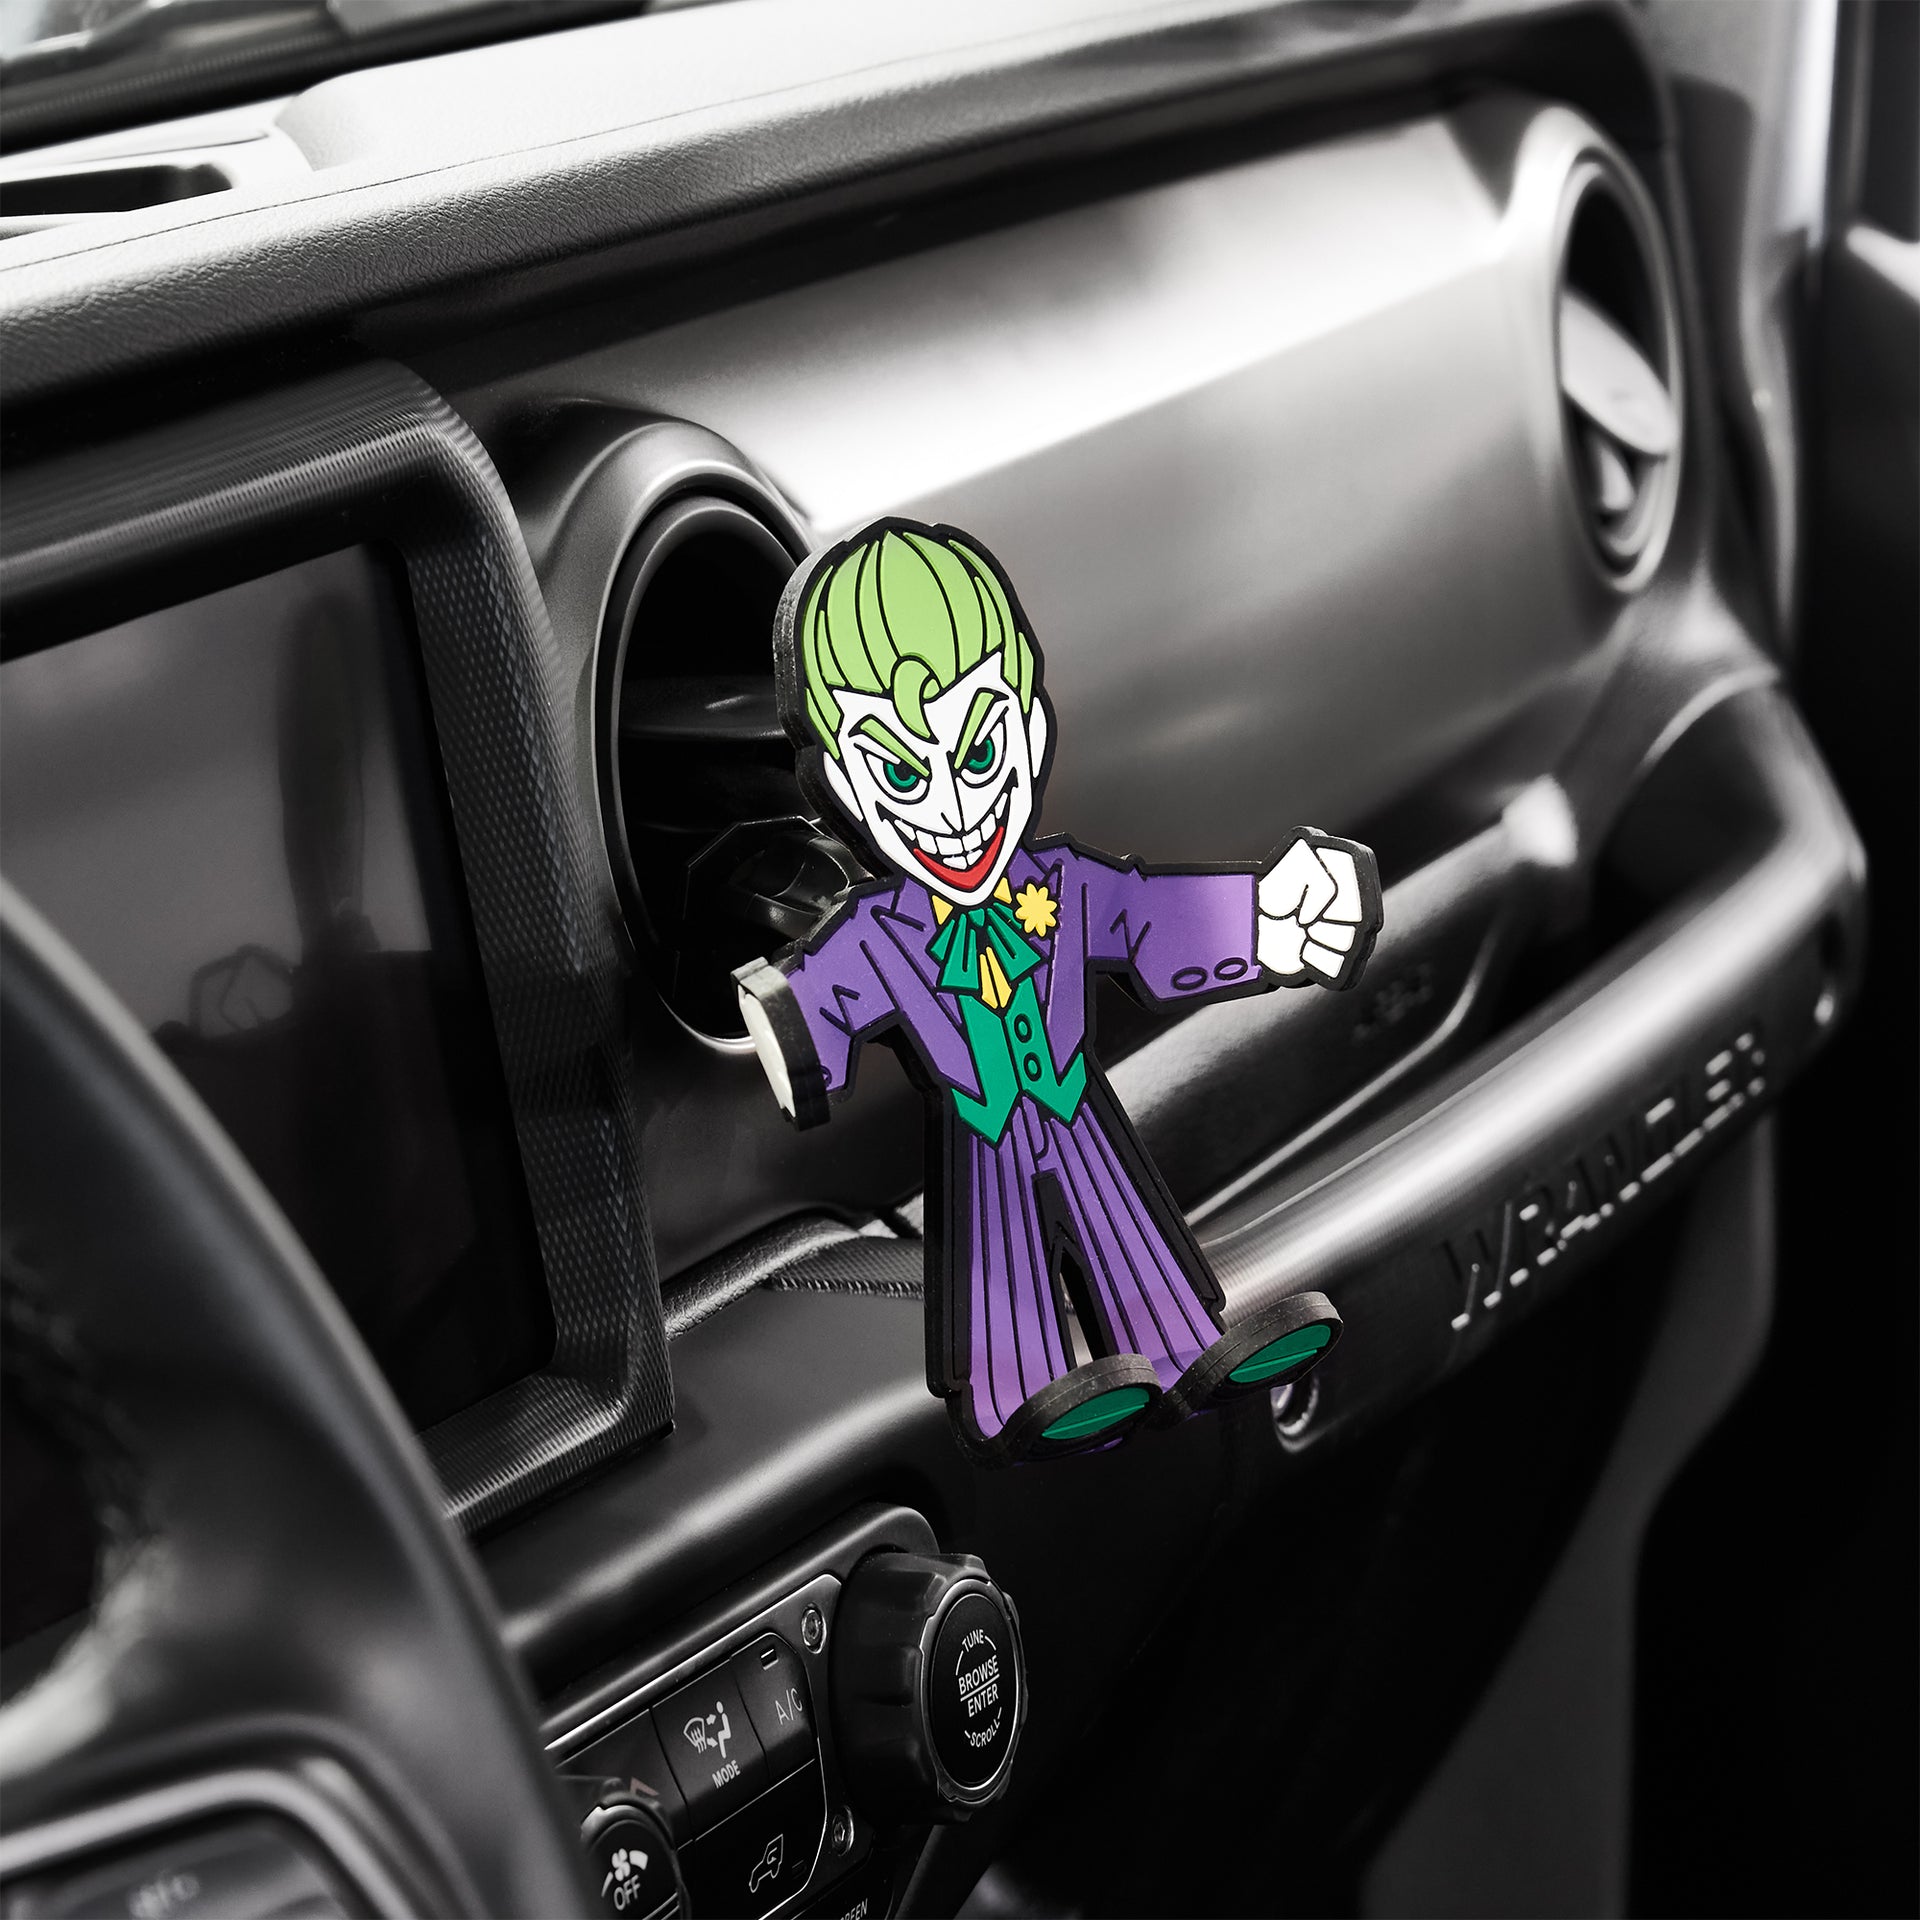 Image of DC Comics The Joker Hug Buddy attached to a car air vent ready to take your phone on another exciting journey